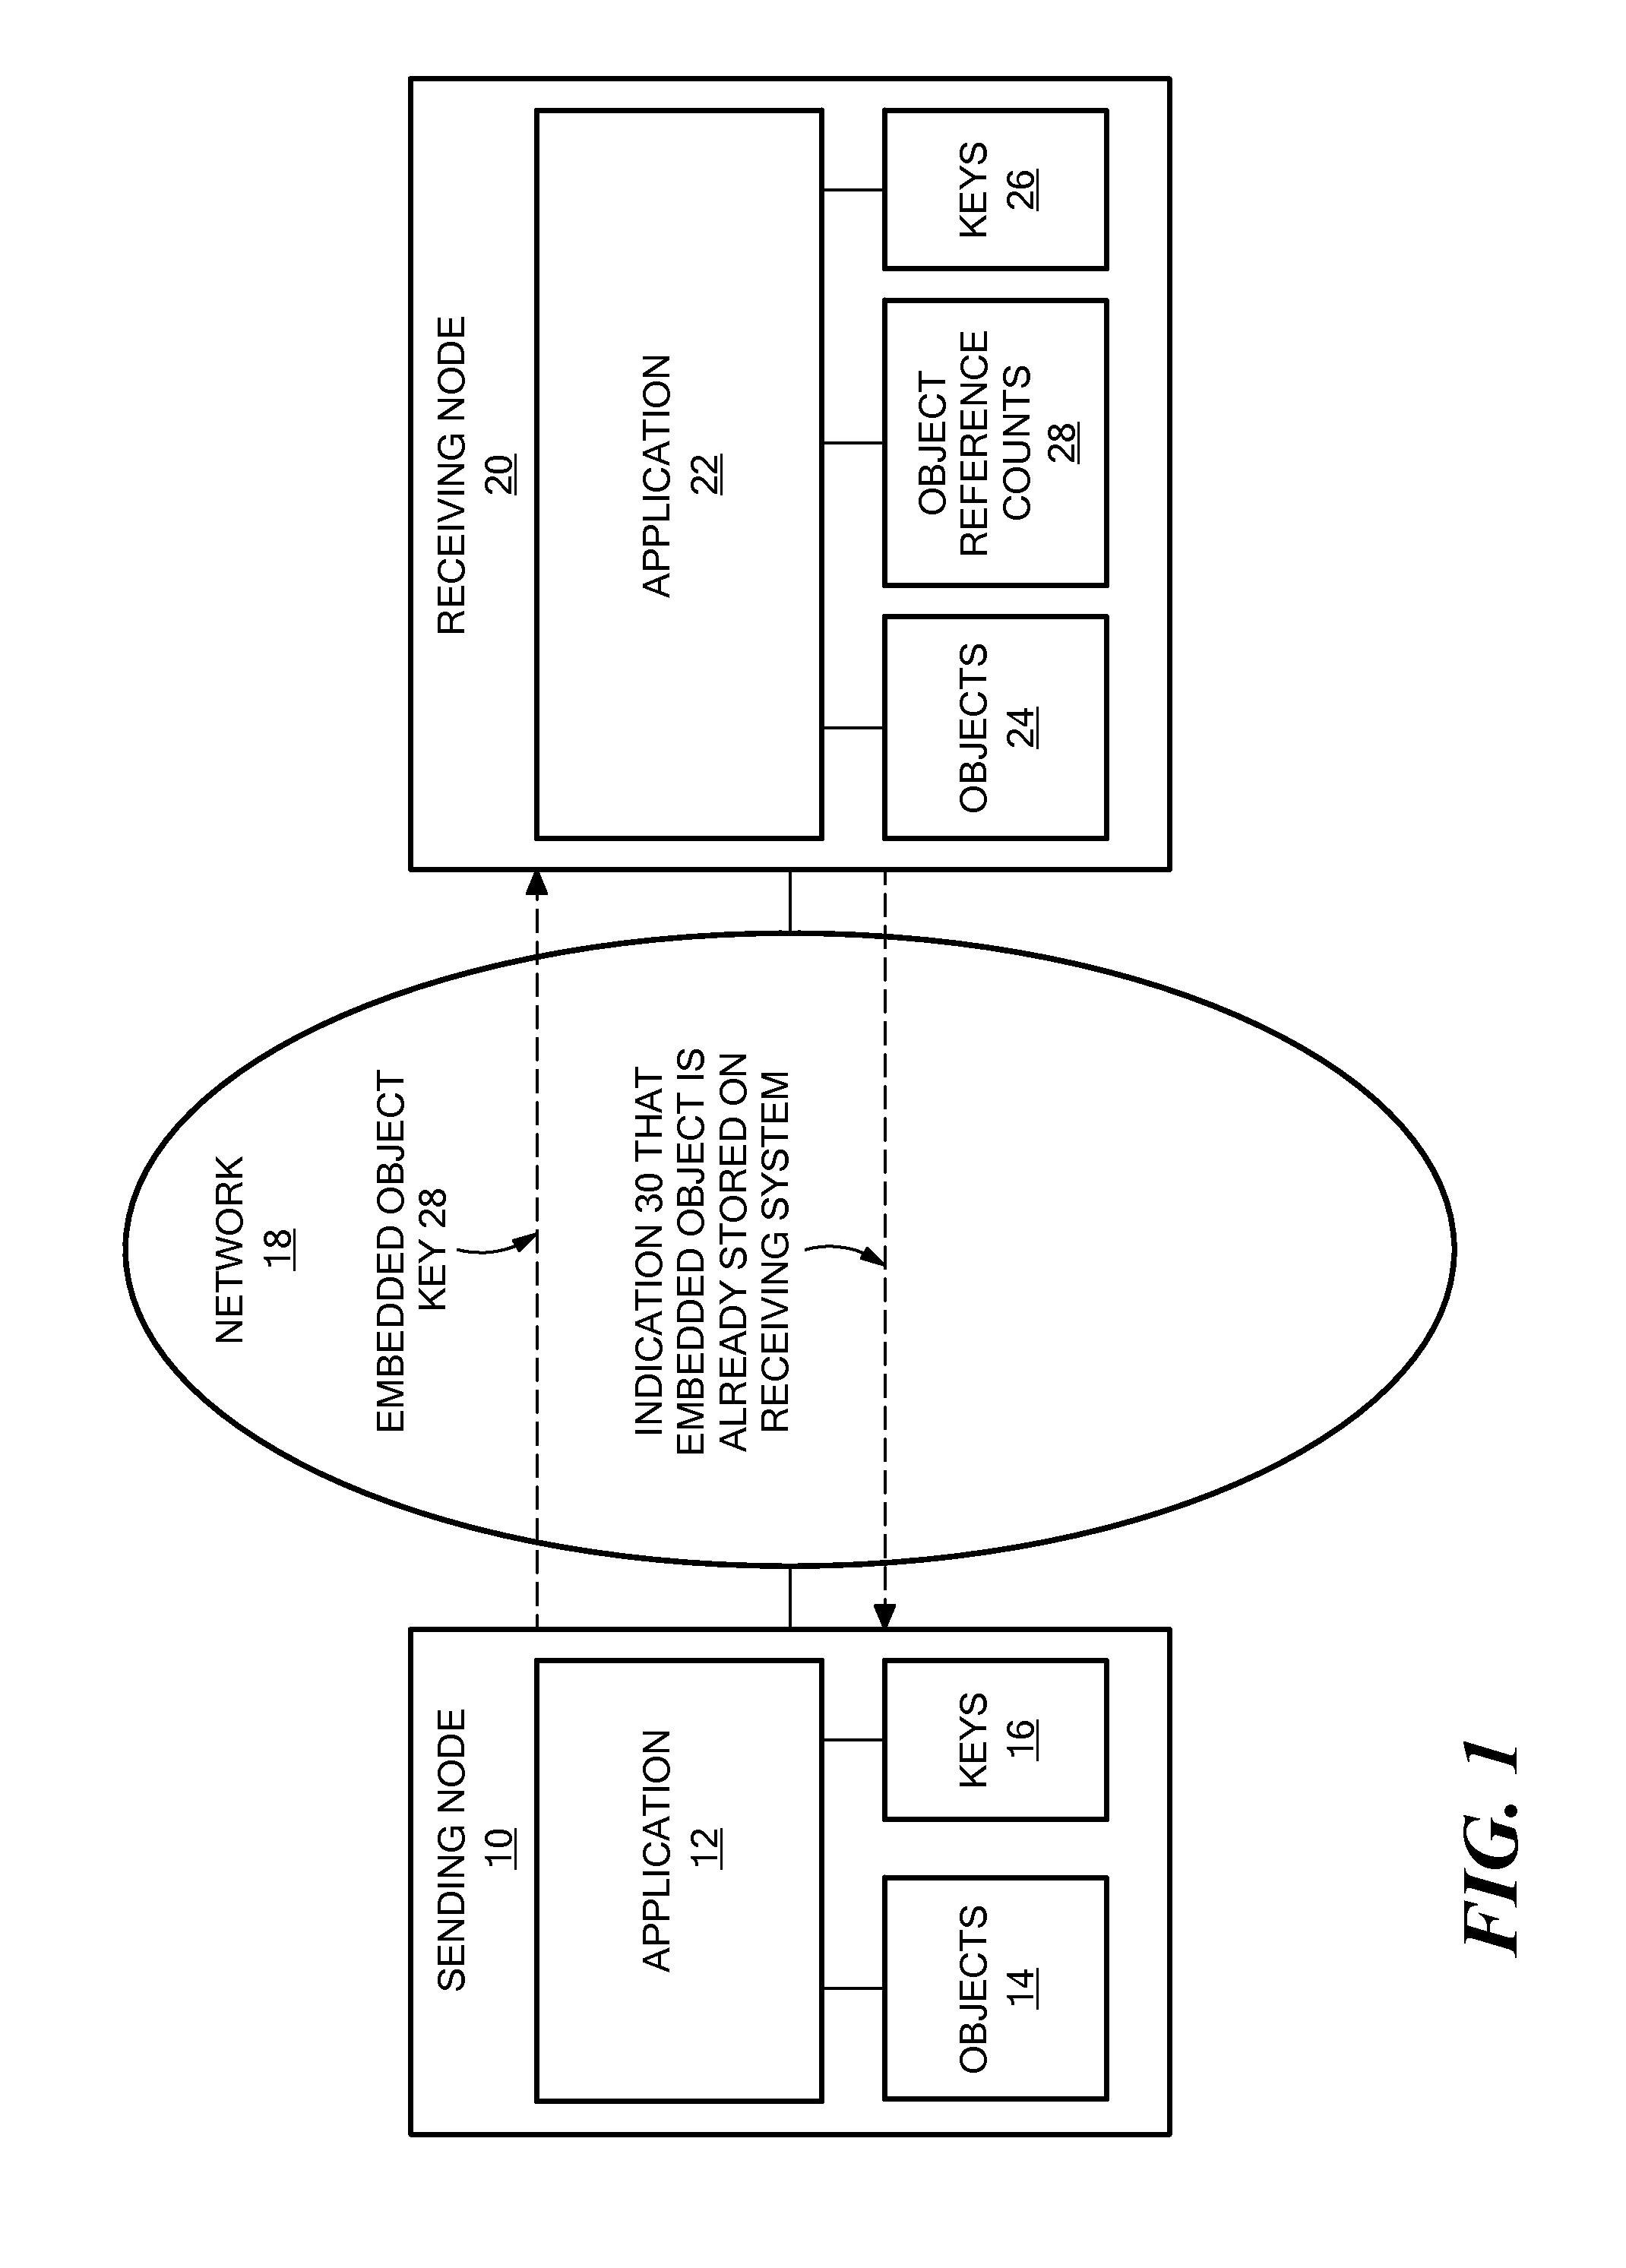 Preventing transfer and duplication of redundantly referenced objects across nodes of an application system